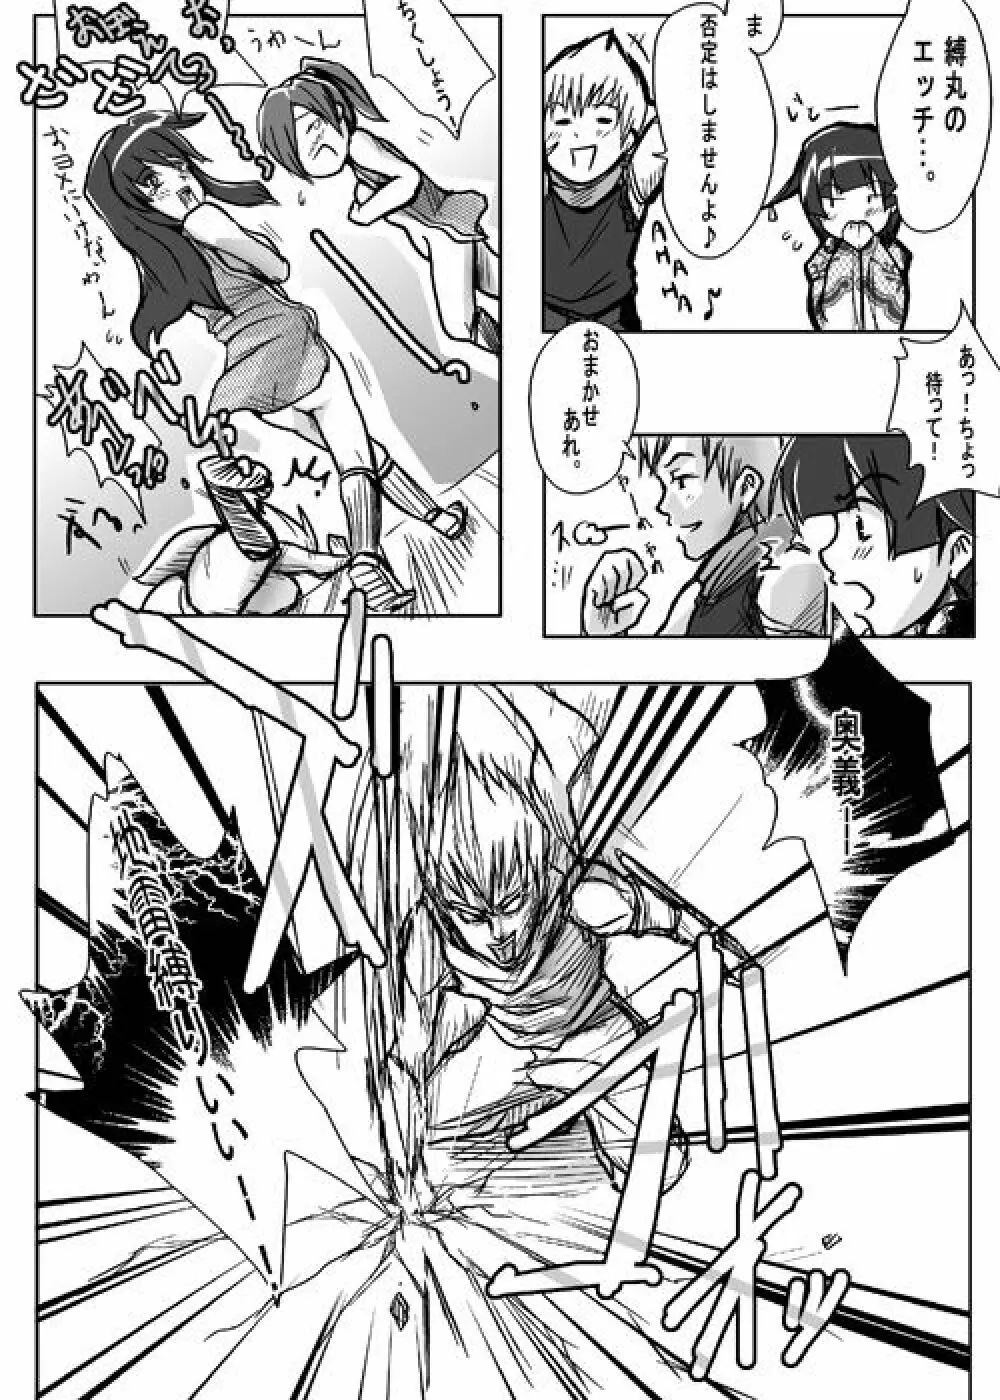 Same-themed manga about kid fighting female ninjas from japanese imageboard. Page.54